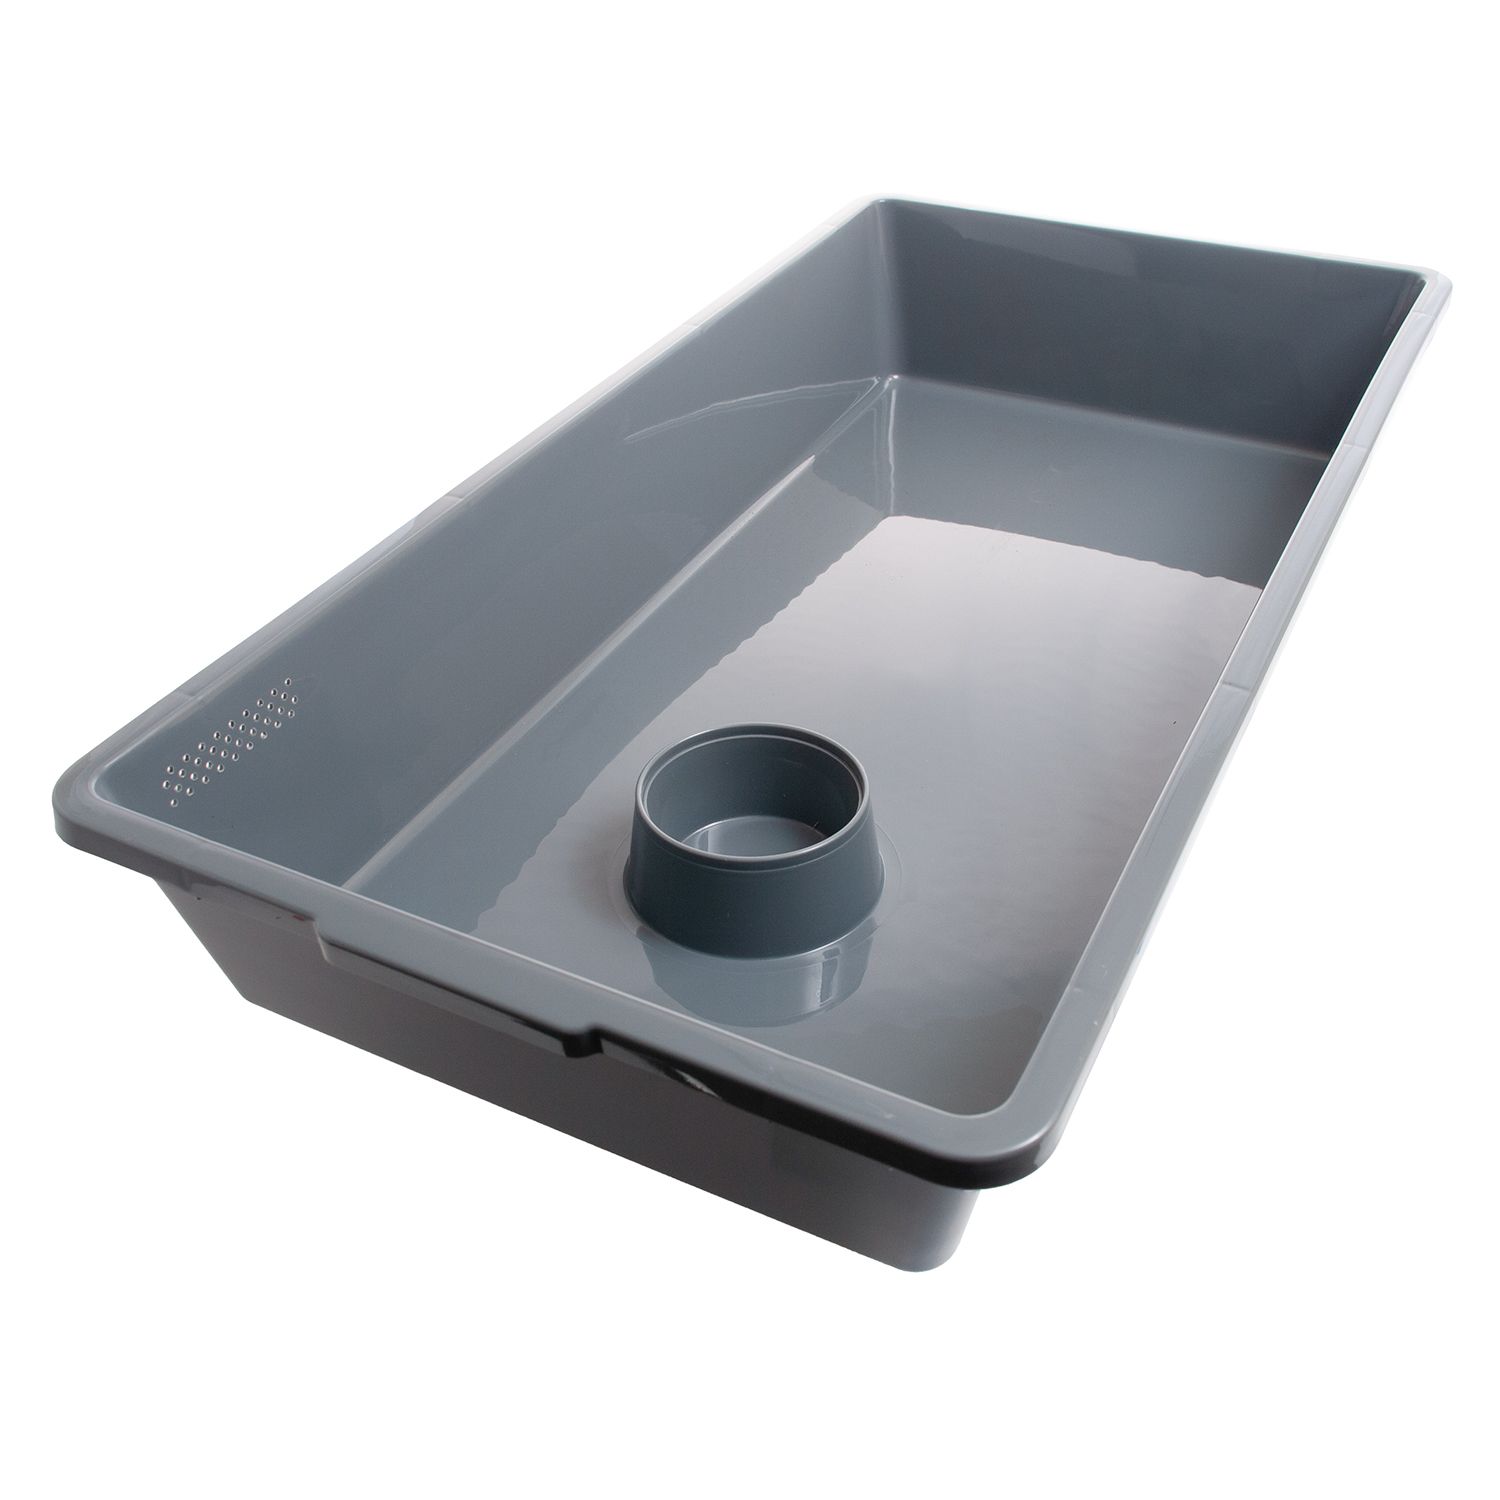 https://www.visionproducts.us/wp-content/uploads/2023/03/vision_products_tub_v70_gray_vents_bowl.jpg